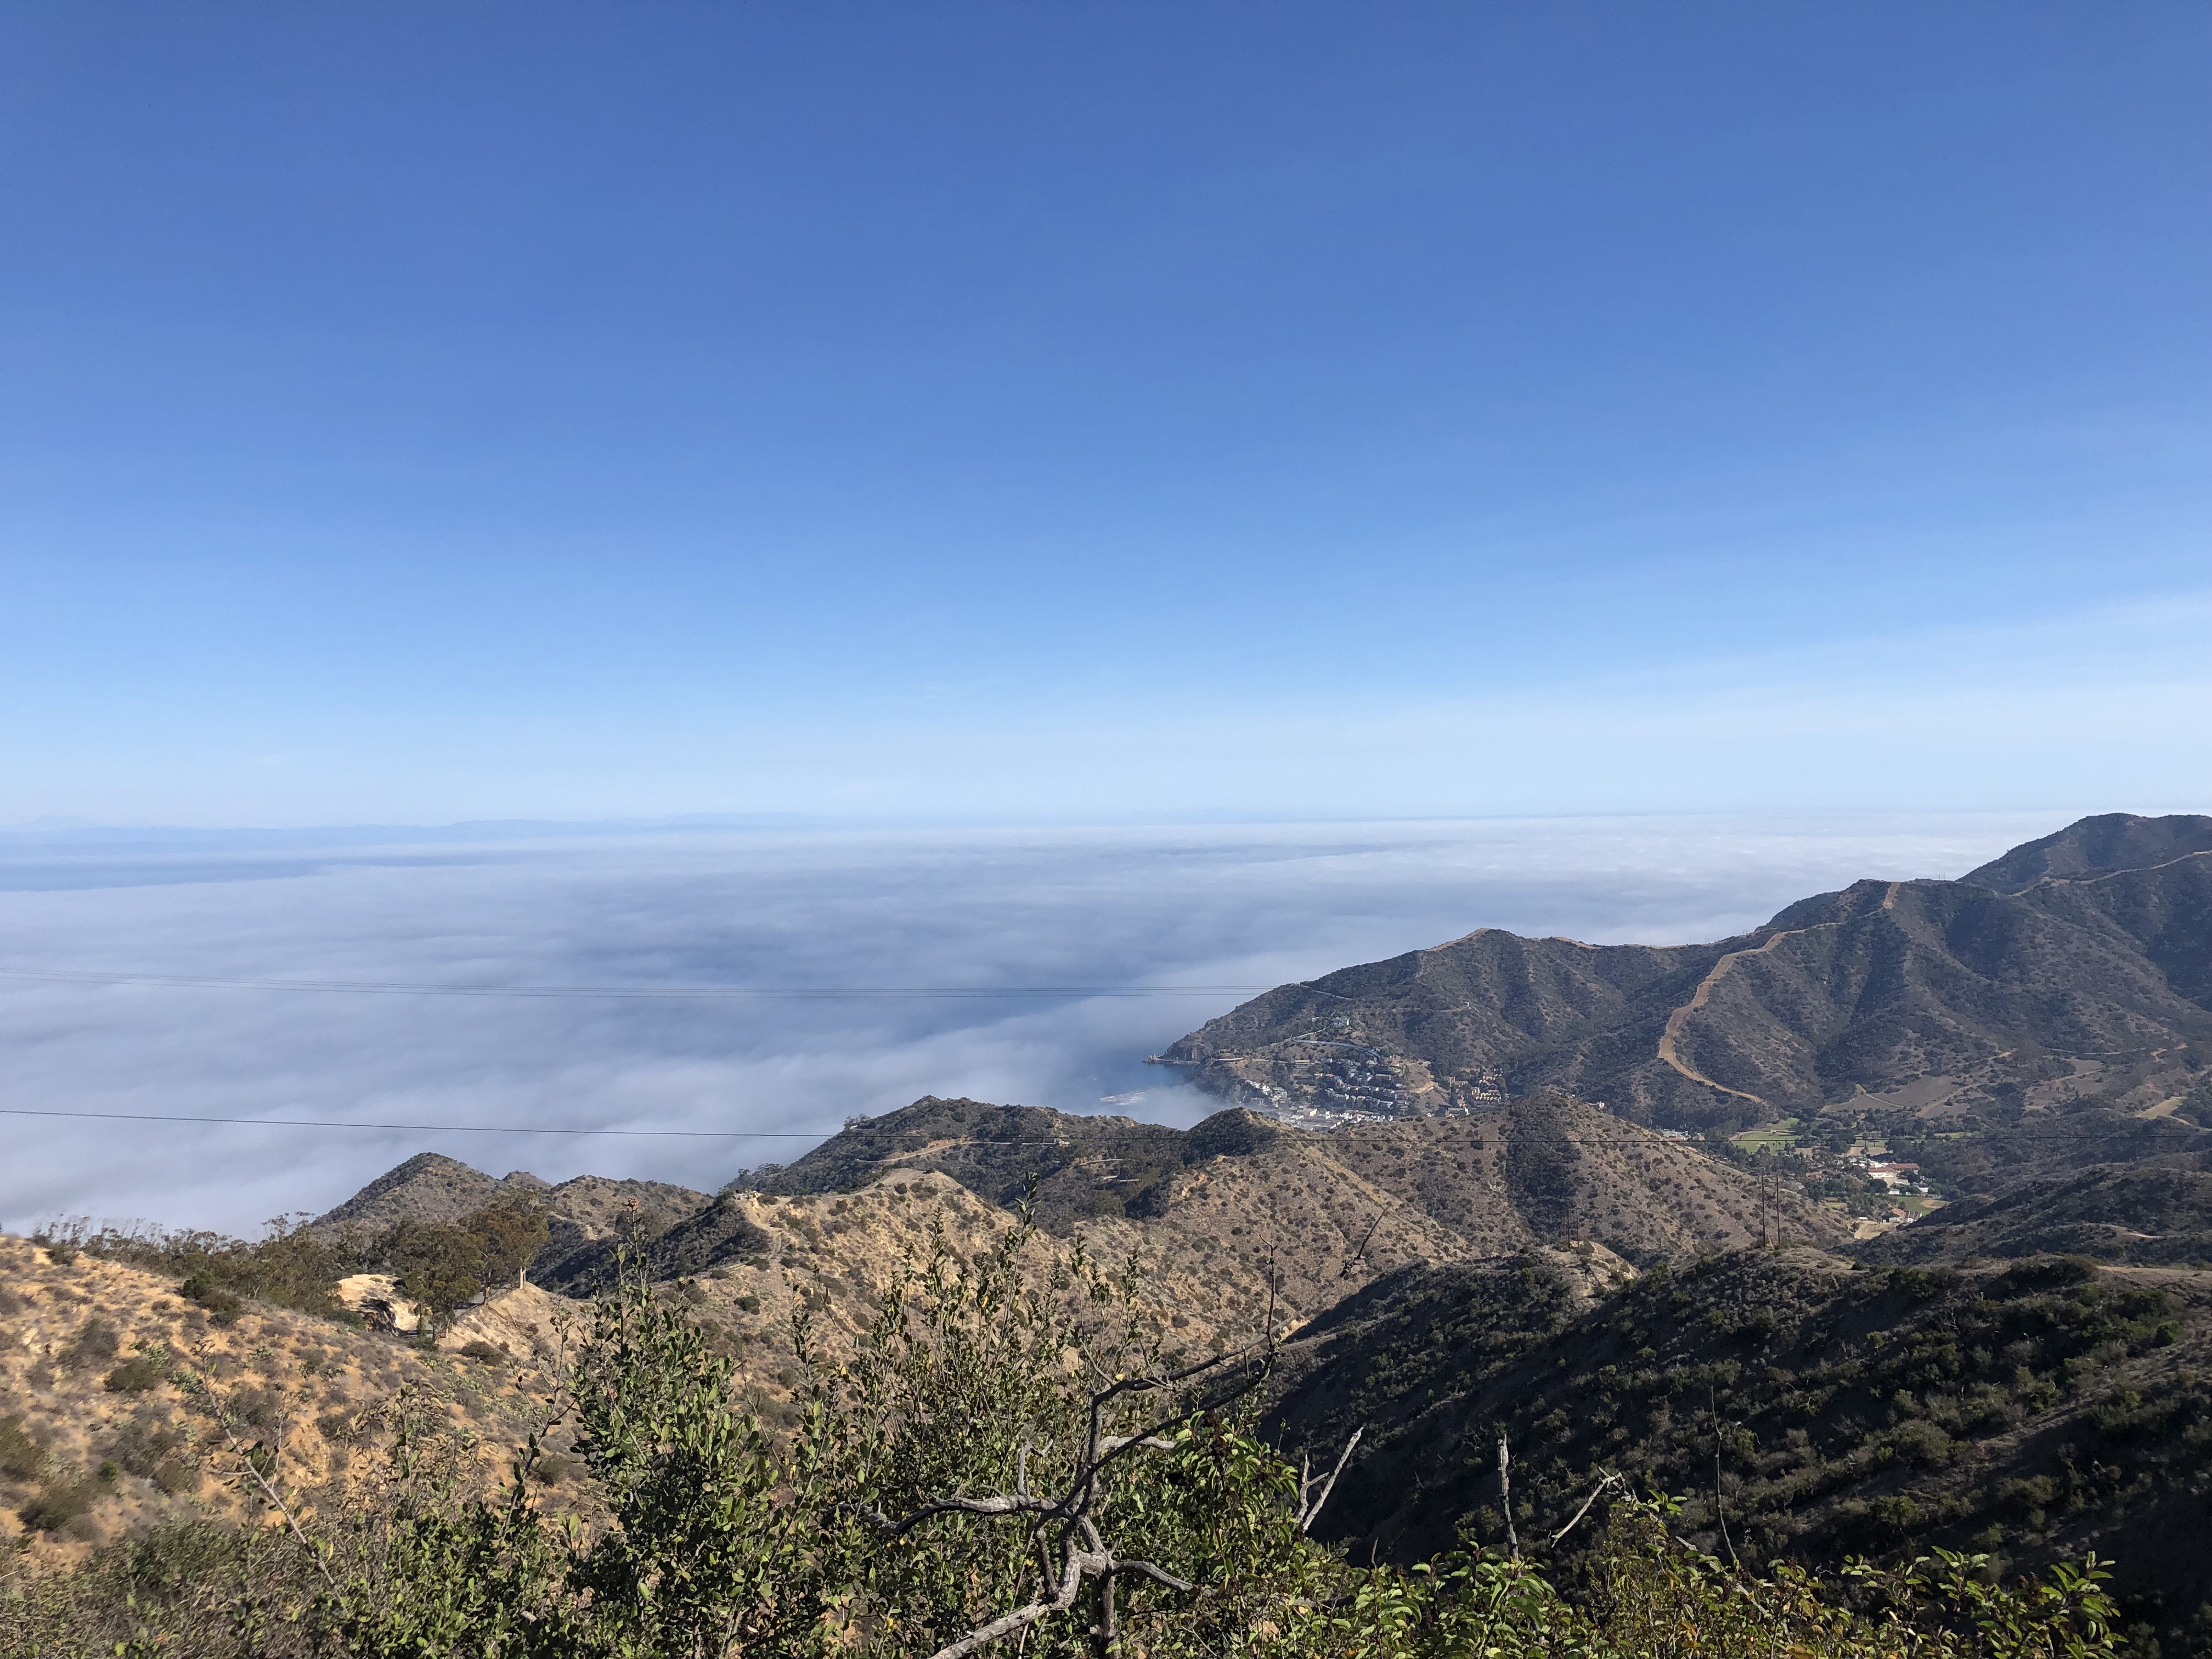 A view of the ocean covered with fog from a high elevation ofer Avalon on Catalina Island.